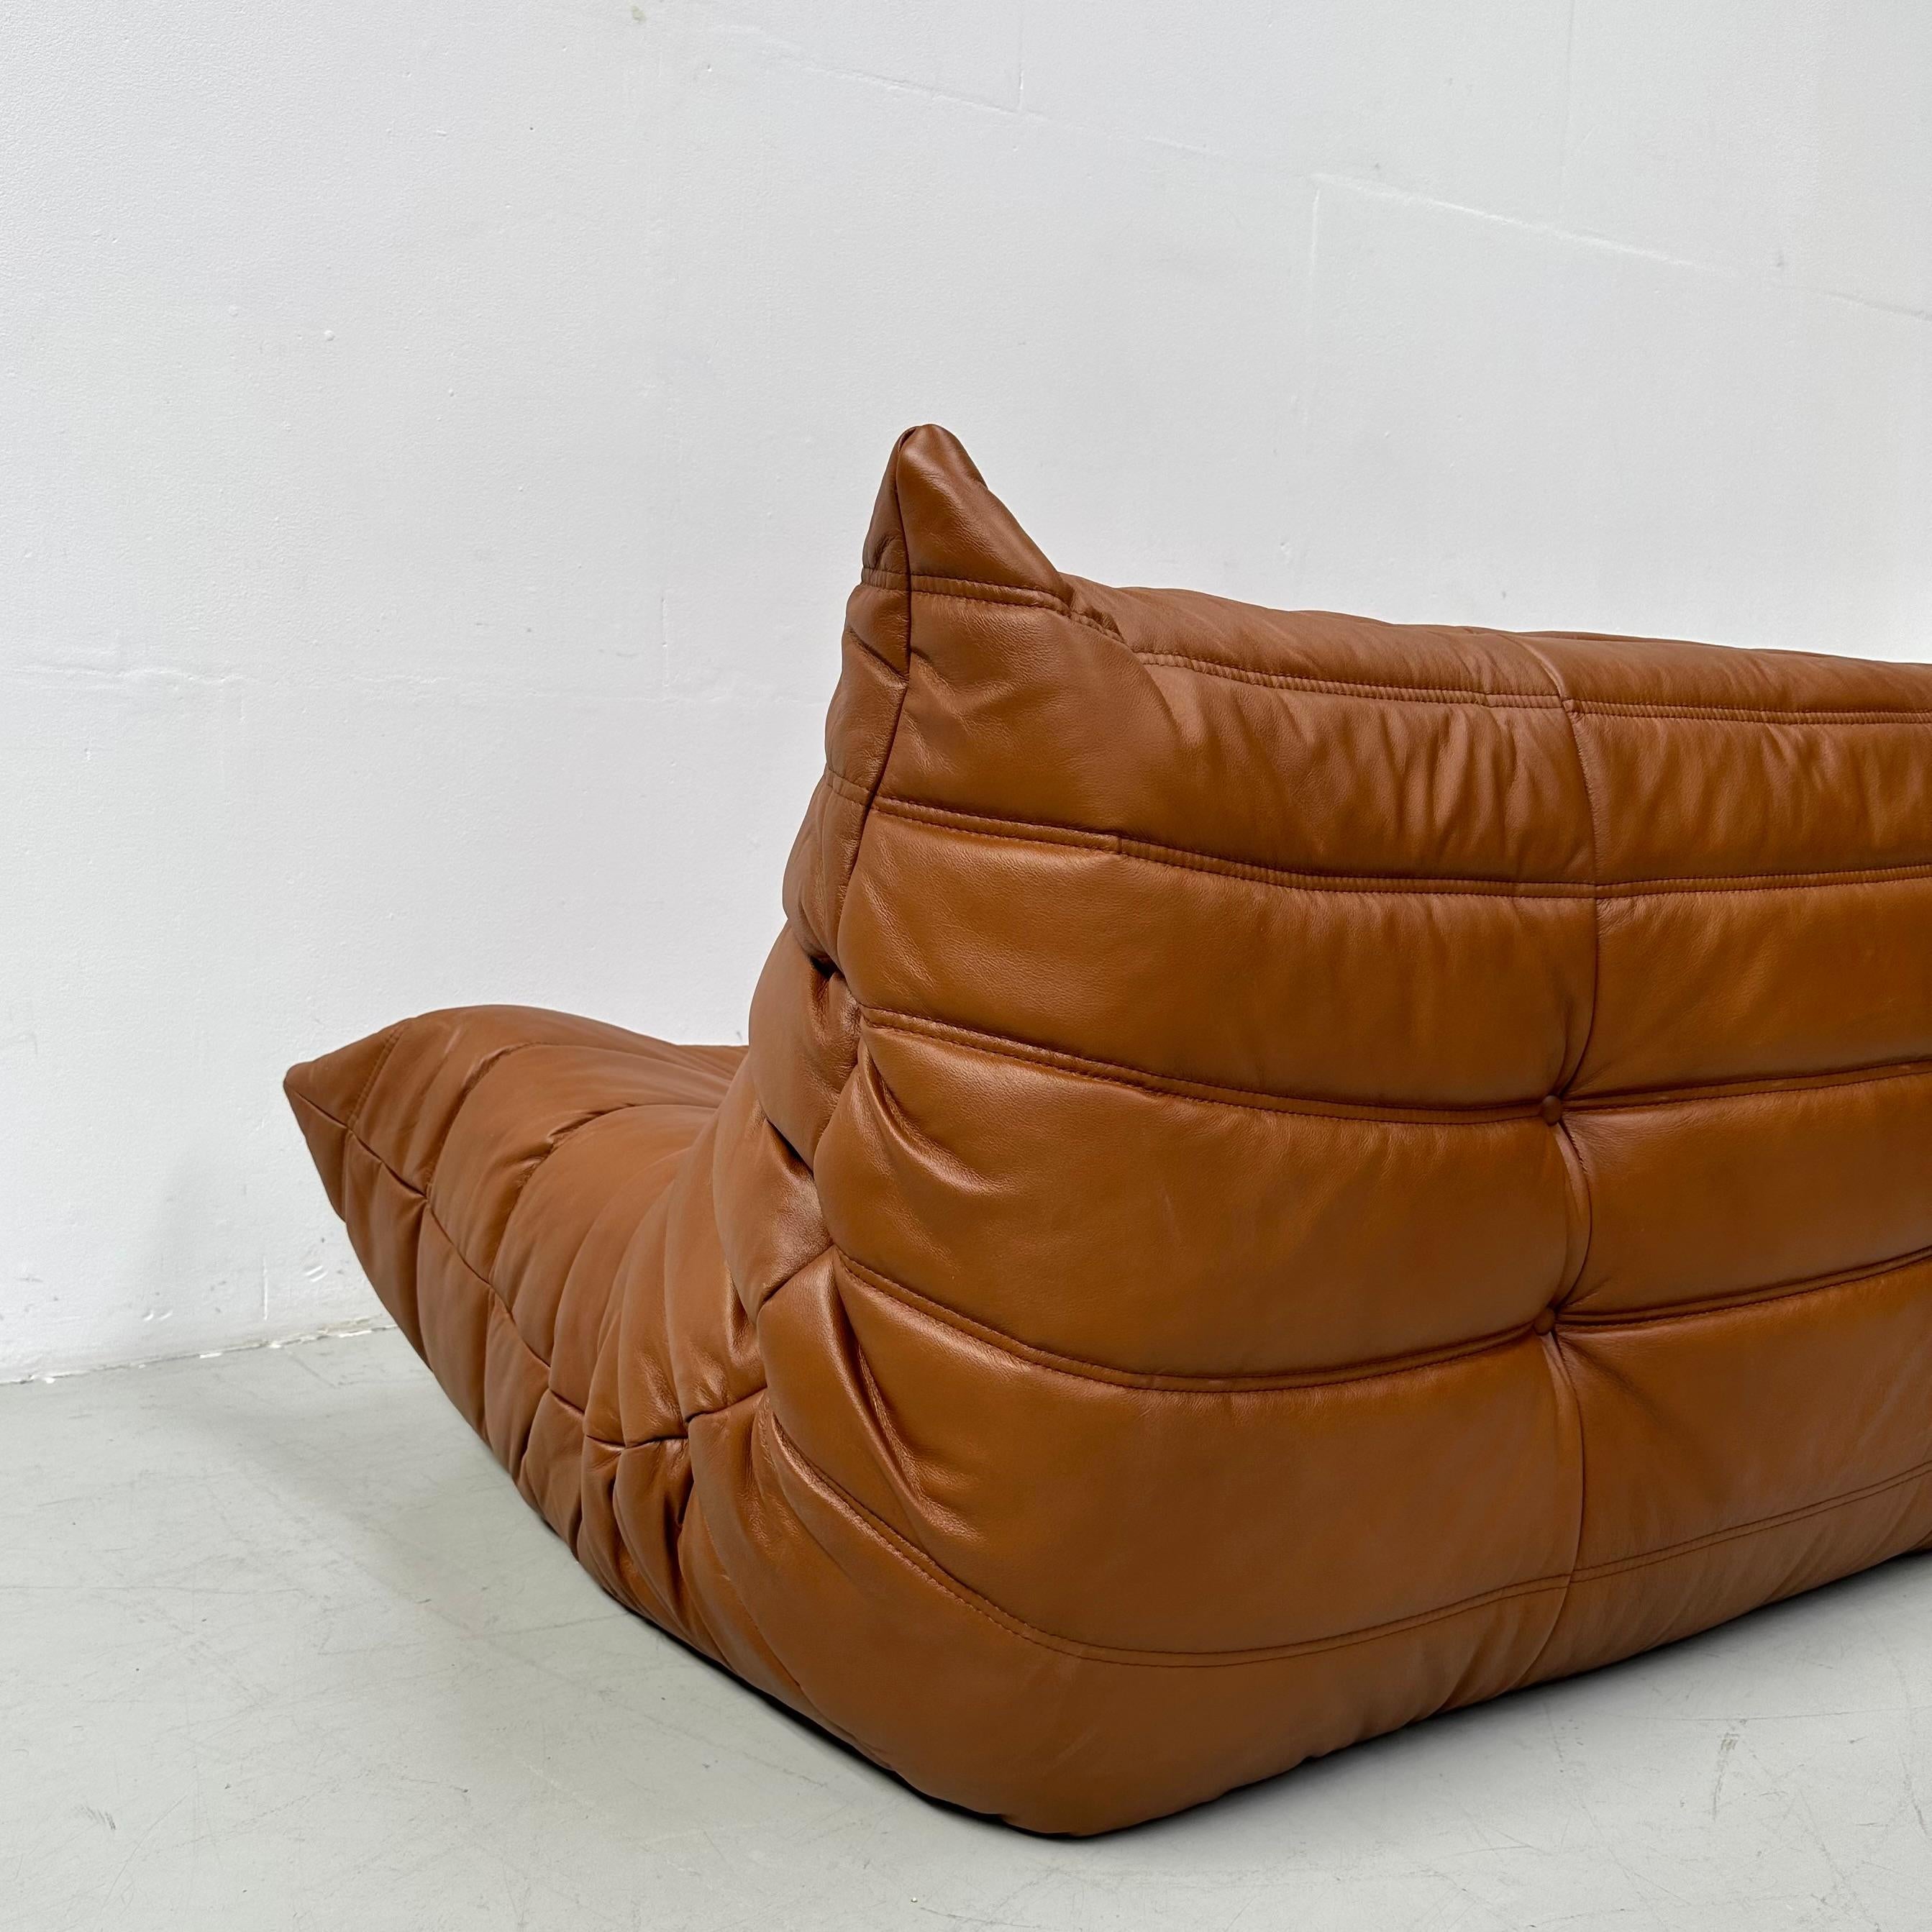 French Togo Sofa in Cognac Leather by Michel Ducaroy for Ligne Roset. For Sale 5